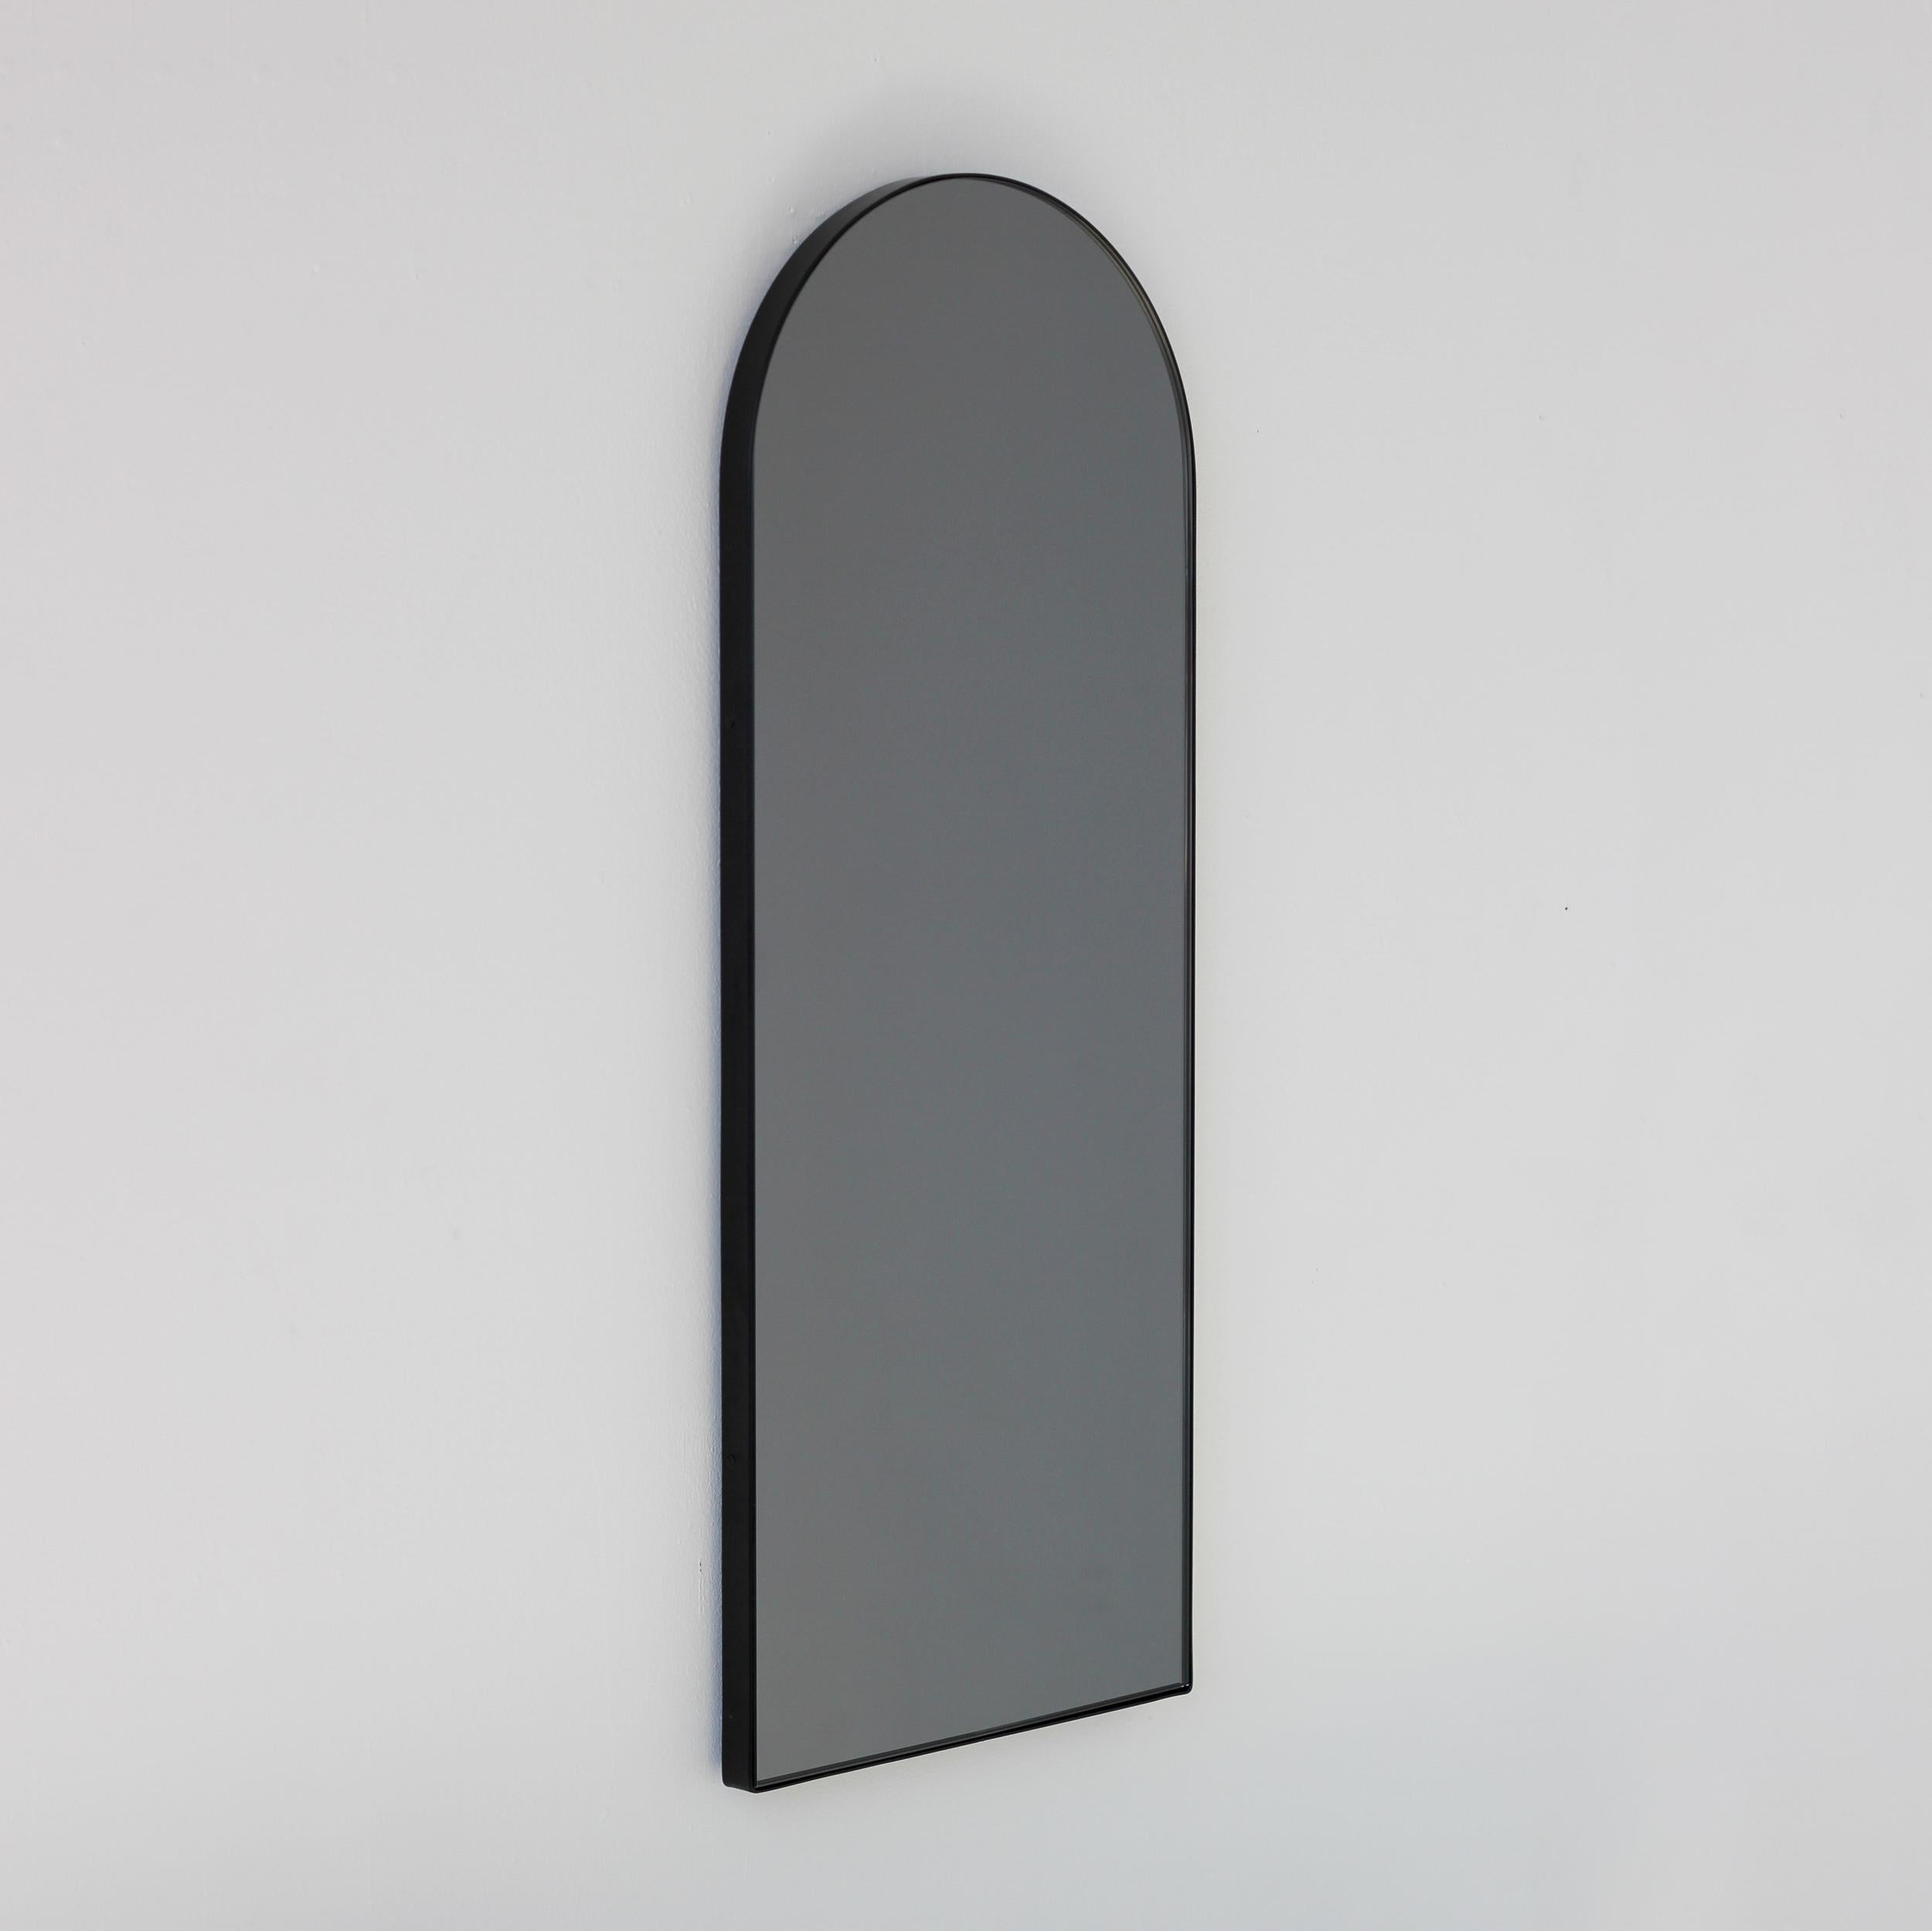 Contemporary arch shaped black tinted mirror with an elegant black frame. Designed and handcrafted in London, UK.

Medium, large and extra-large (37cm x 56cm, 46cm x 71cm and 48cm x 97cm) mirrors are fitted with an ingenious French cleat (split